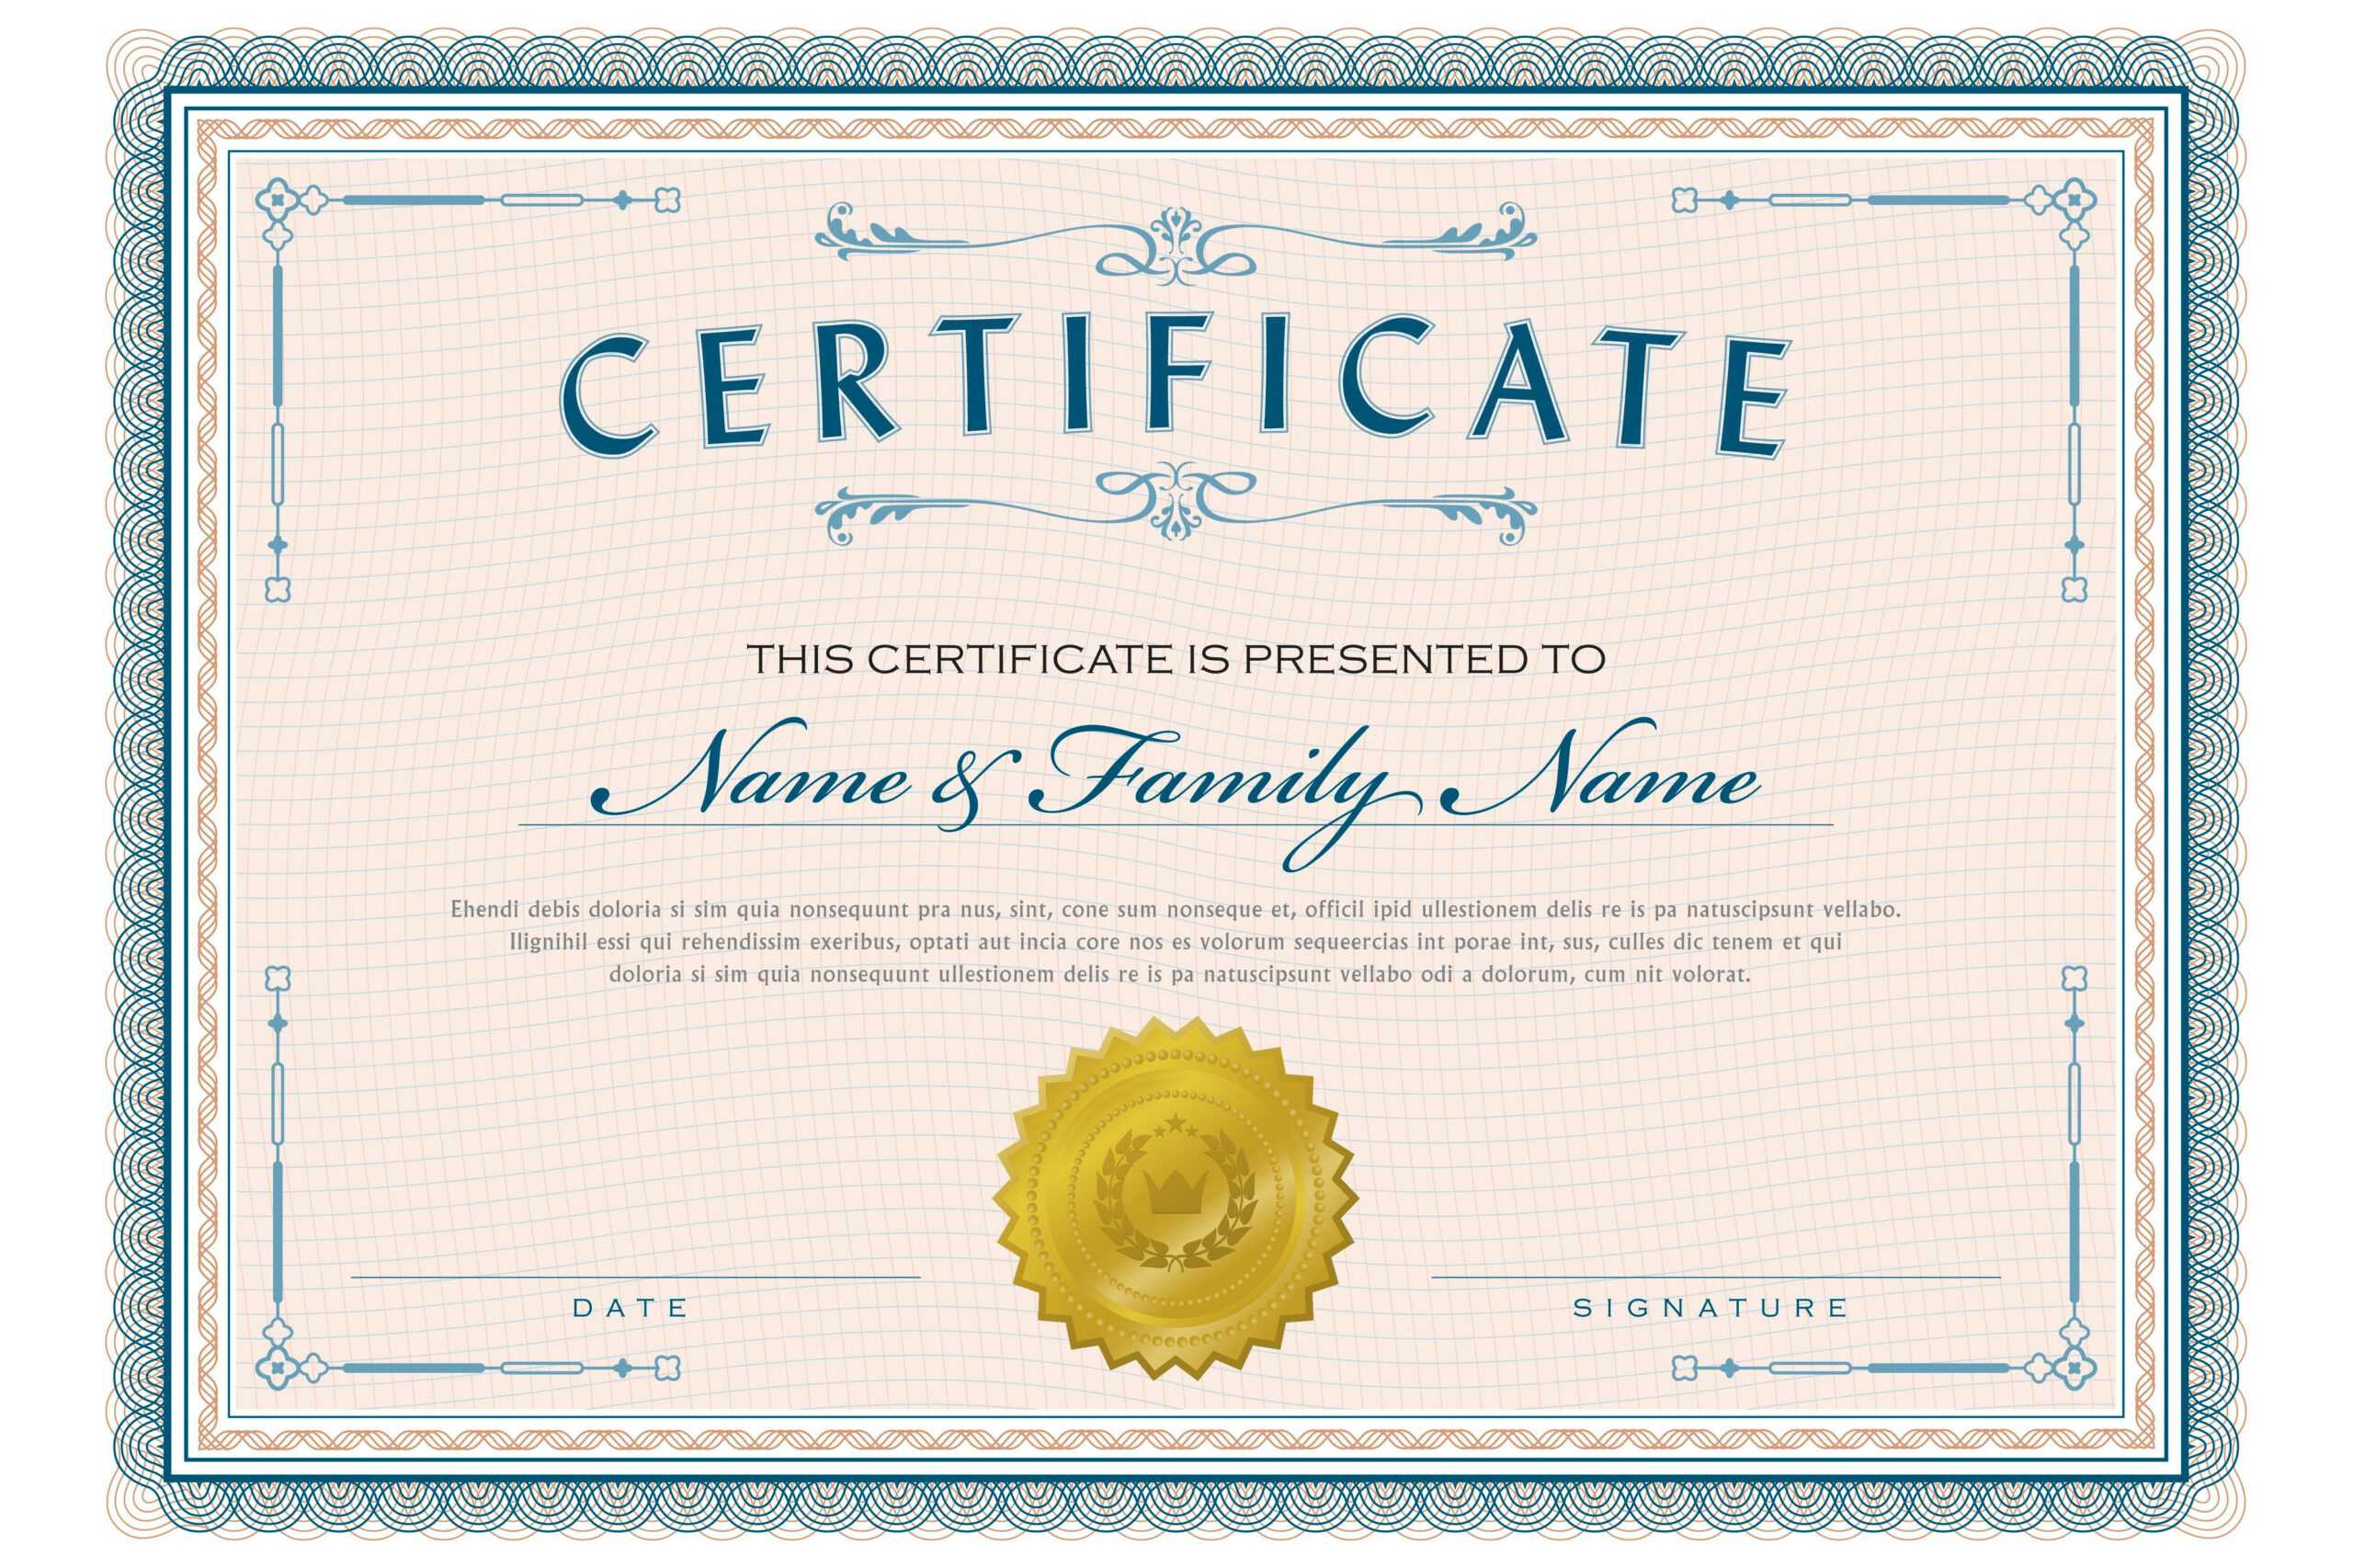 Necessary Parts Of An Award Certificate With Spelling Bee Award Certificate Template